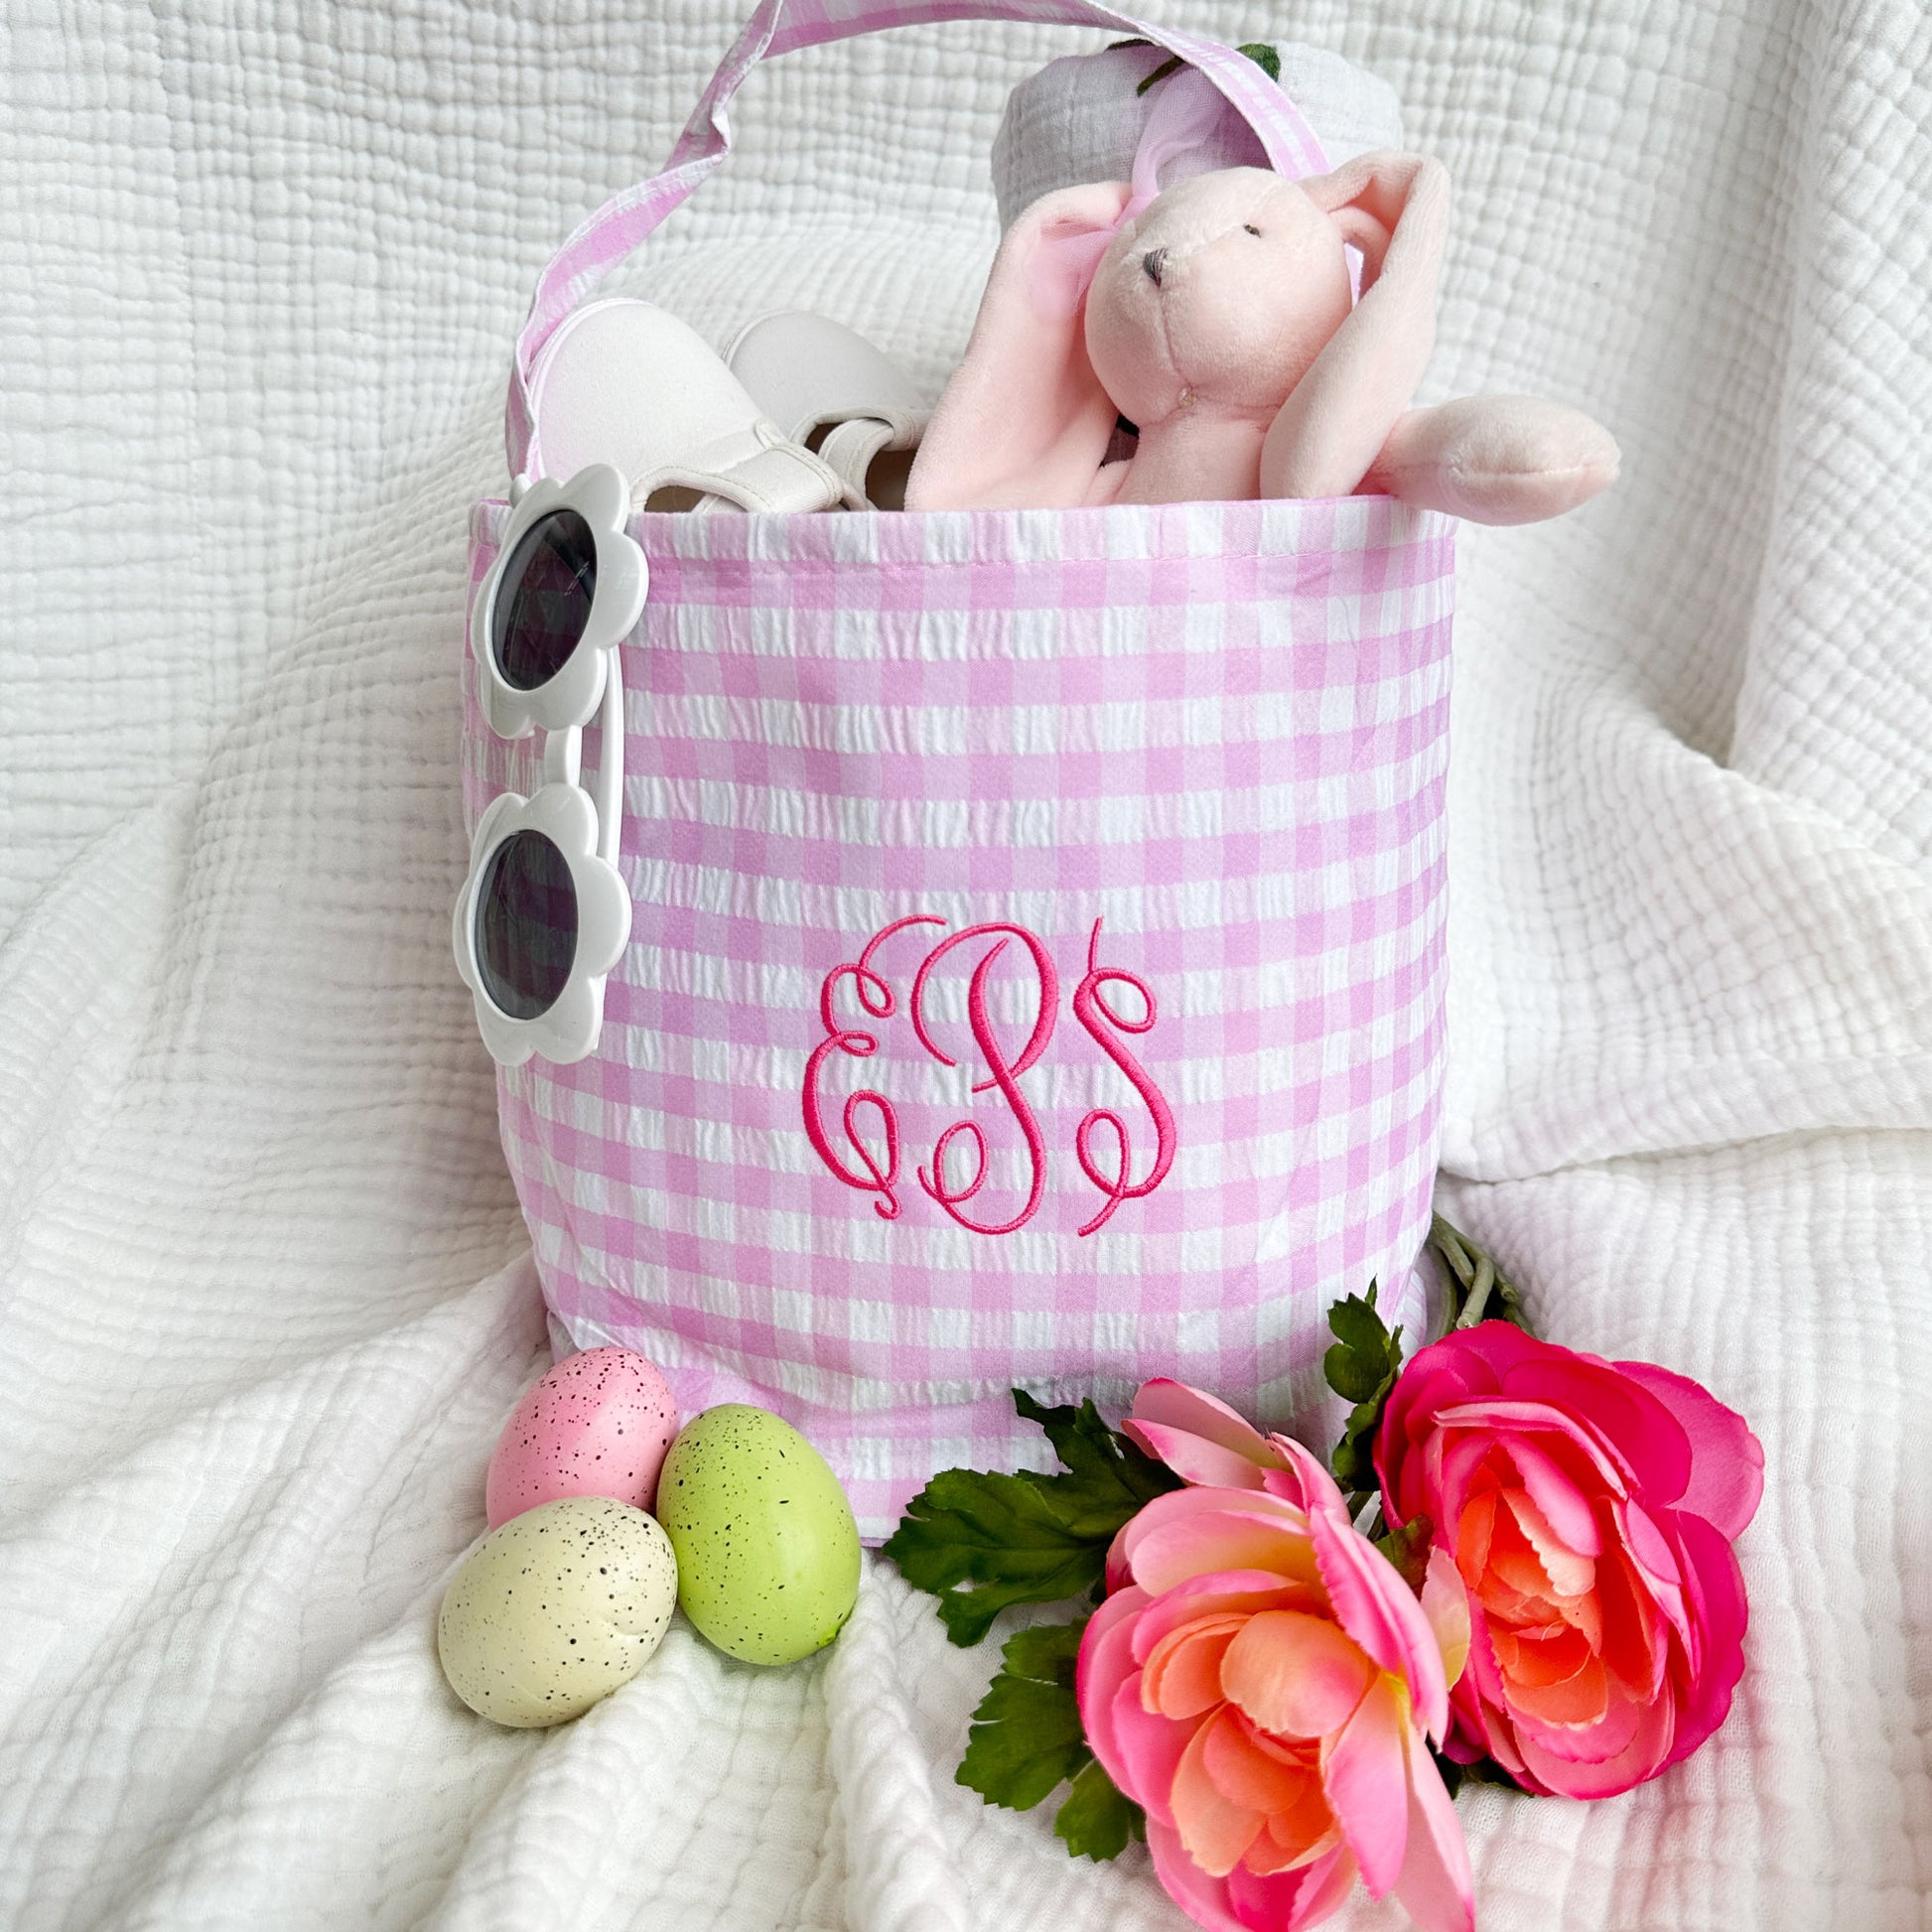 Pink gingham easter basket filled with gifts featuring a three letter cursive girly monogram embroidered in a darker pink thread